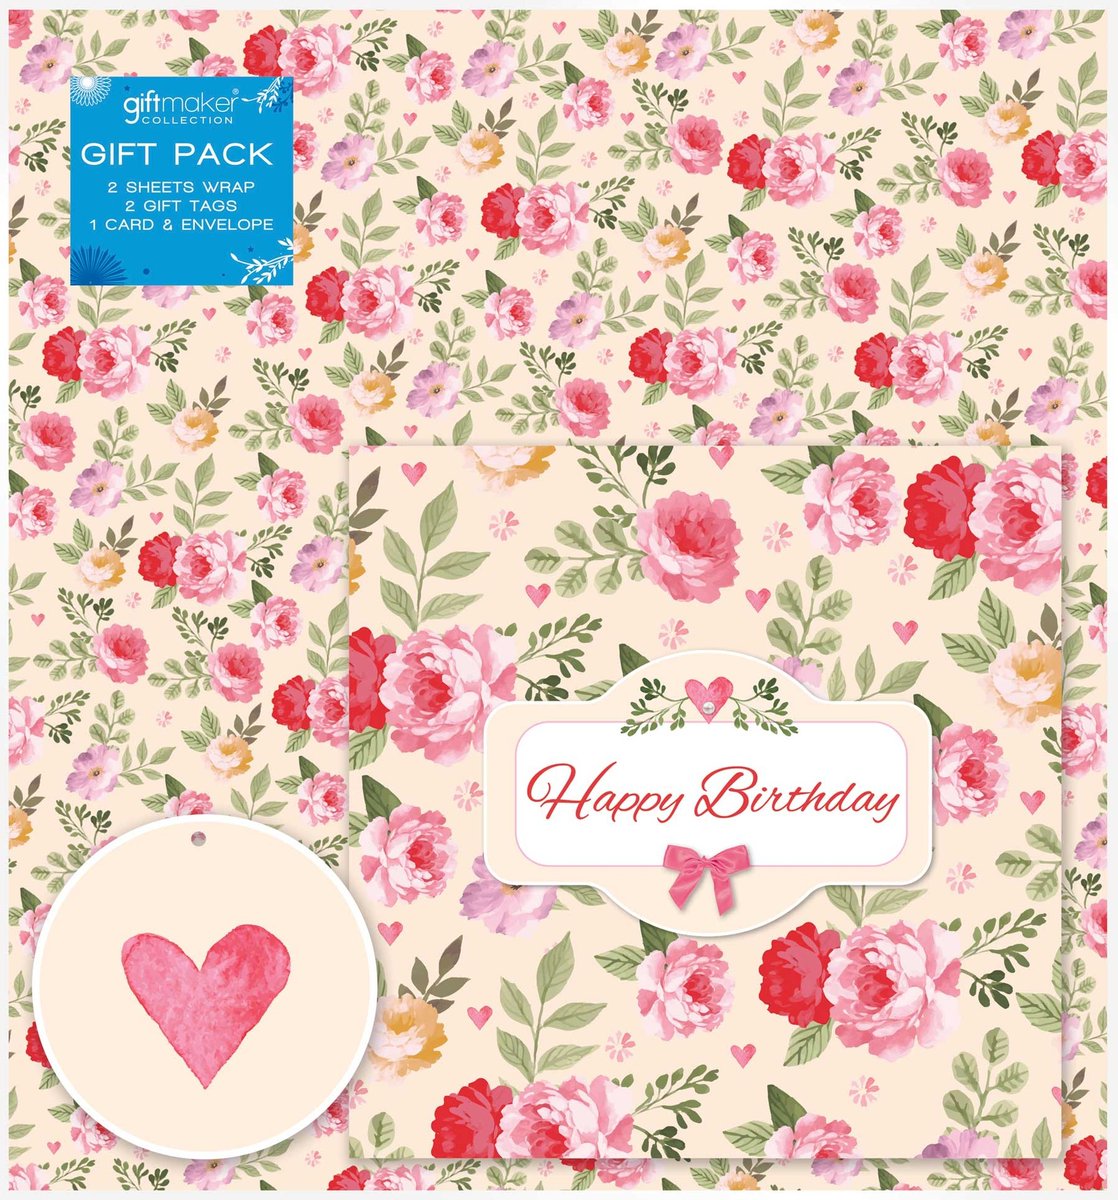 2 Sheets Gift Wrapping Paper With 2 Tags 50cm x 70cm Pink Flowers Birthday D12 